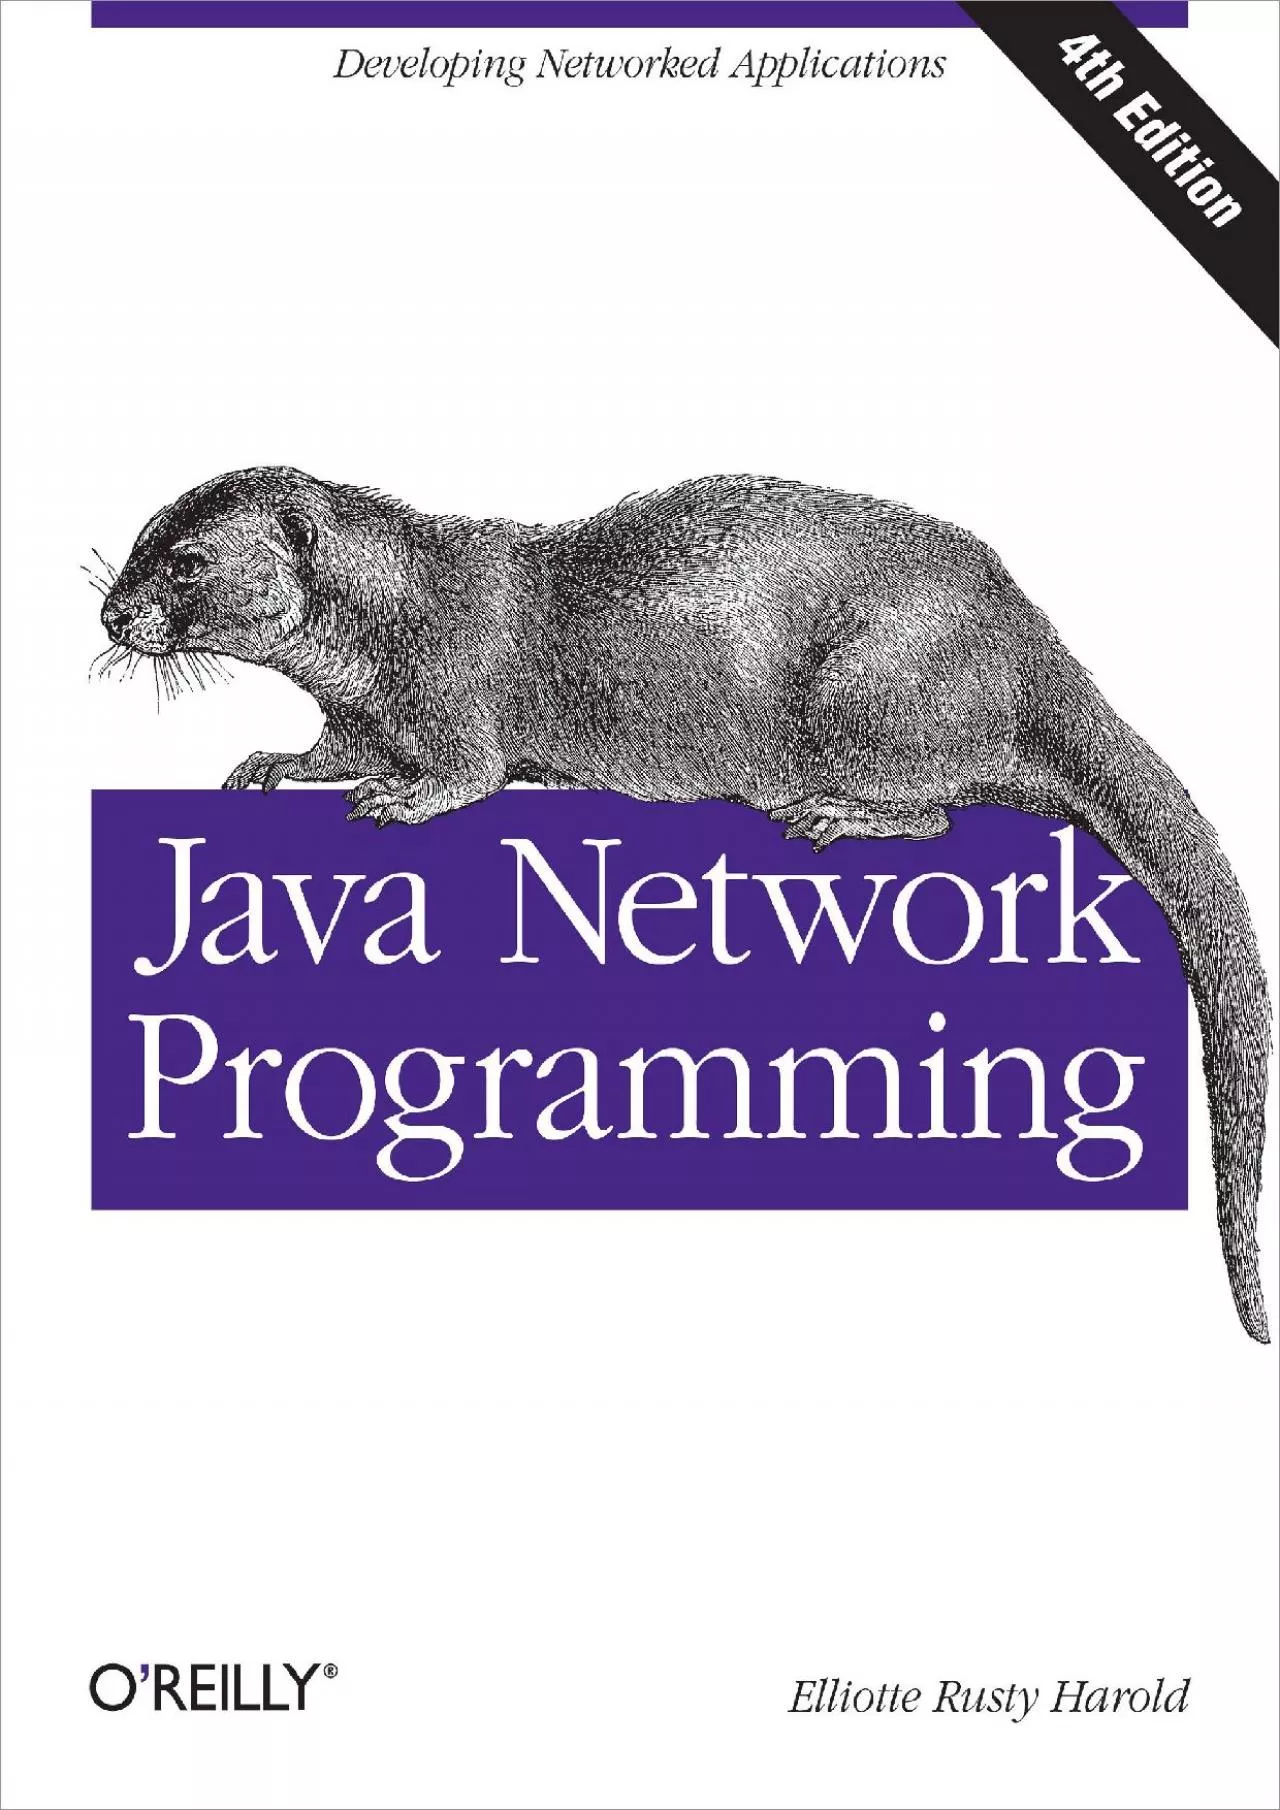 [PDF]-Java Network Programming Developing Networked Applications